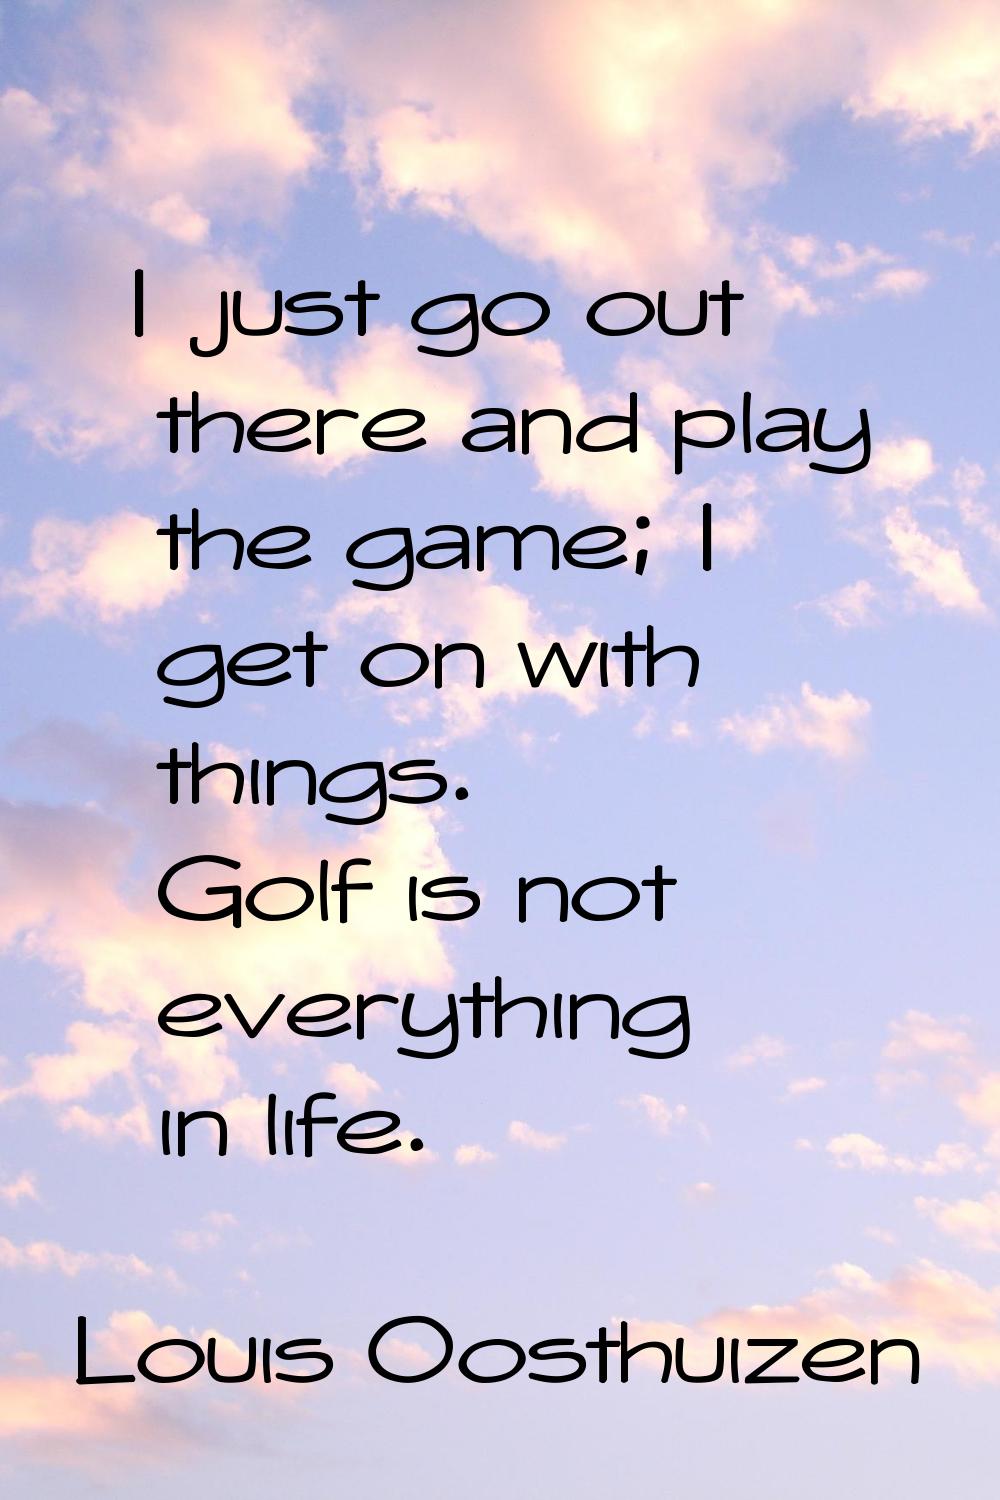 I just go out there and play the game; I get on with things. Golf is not everything in life.